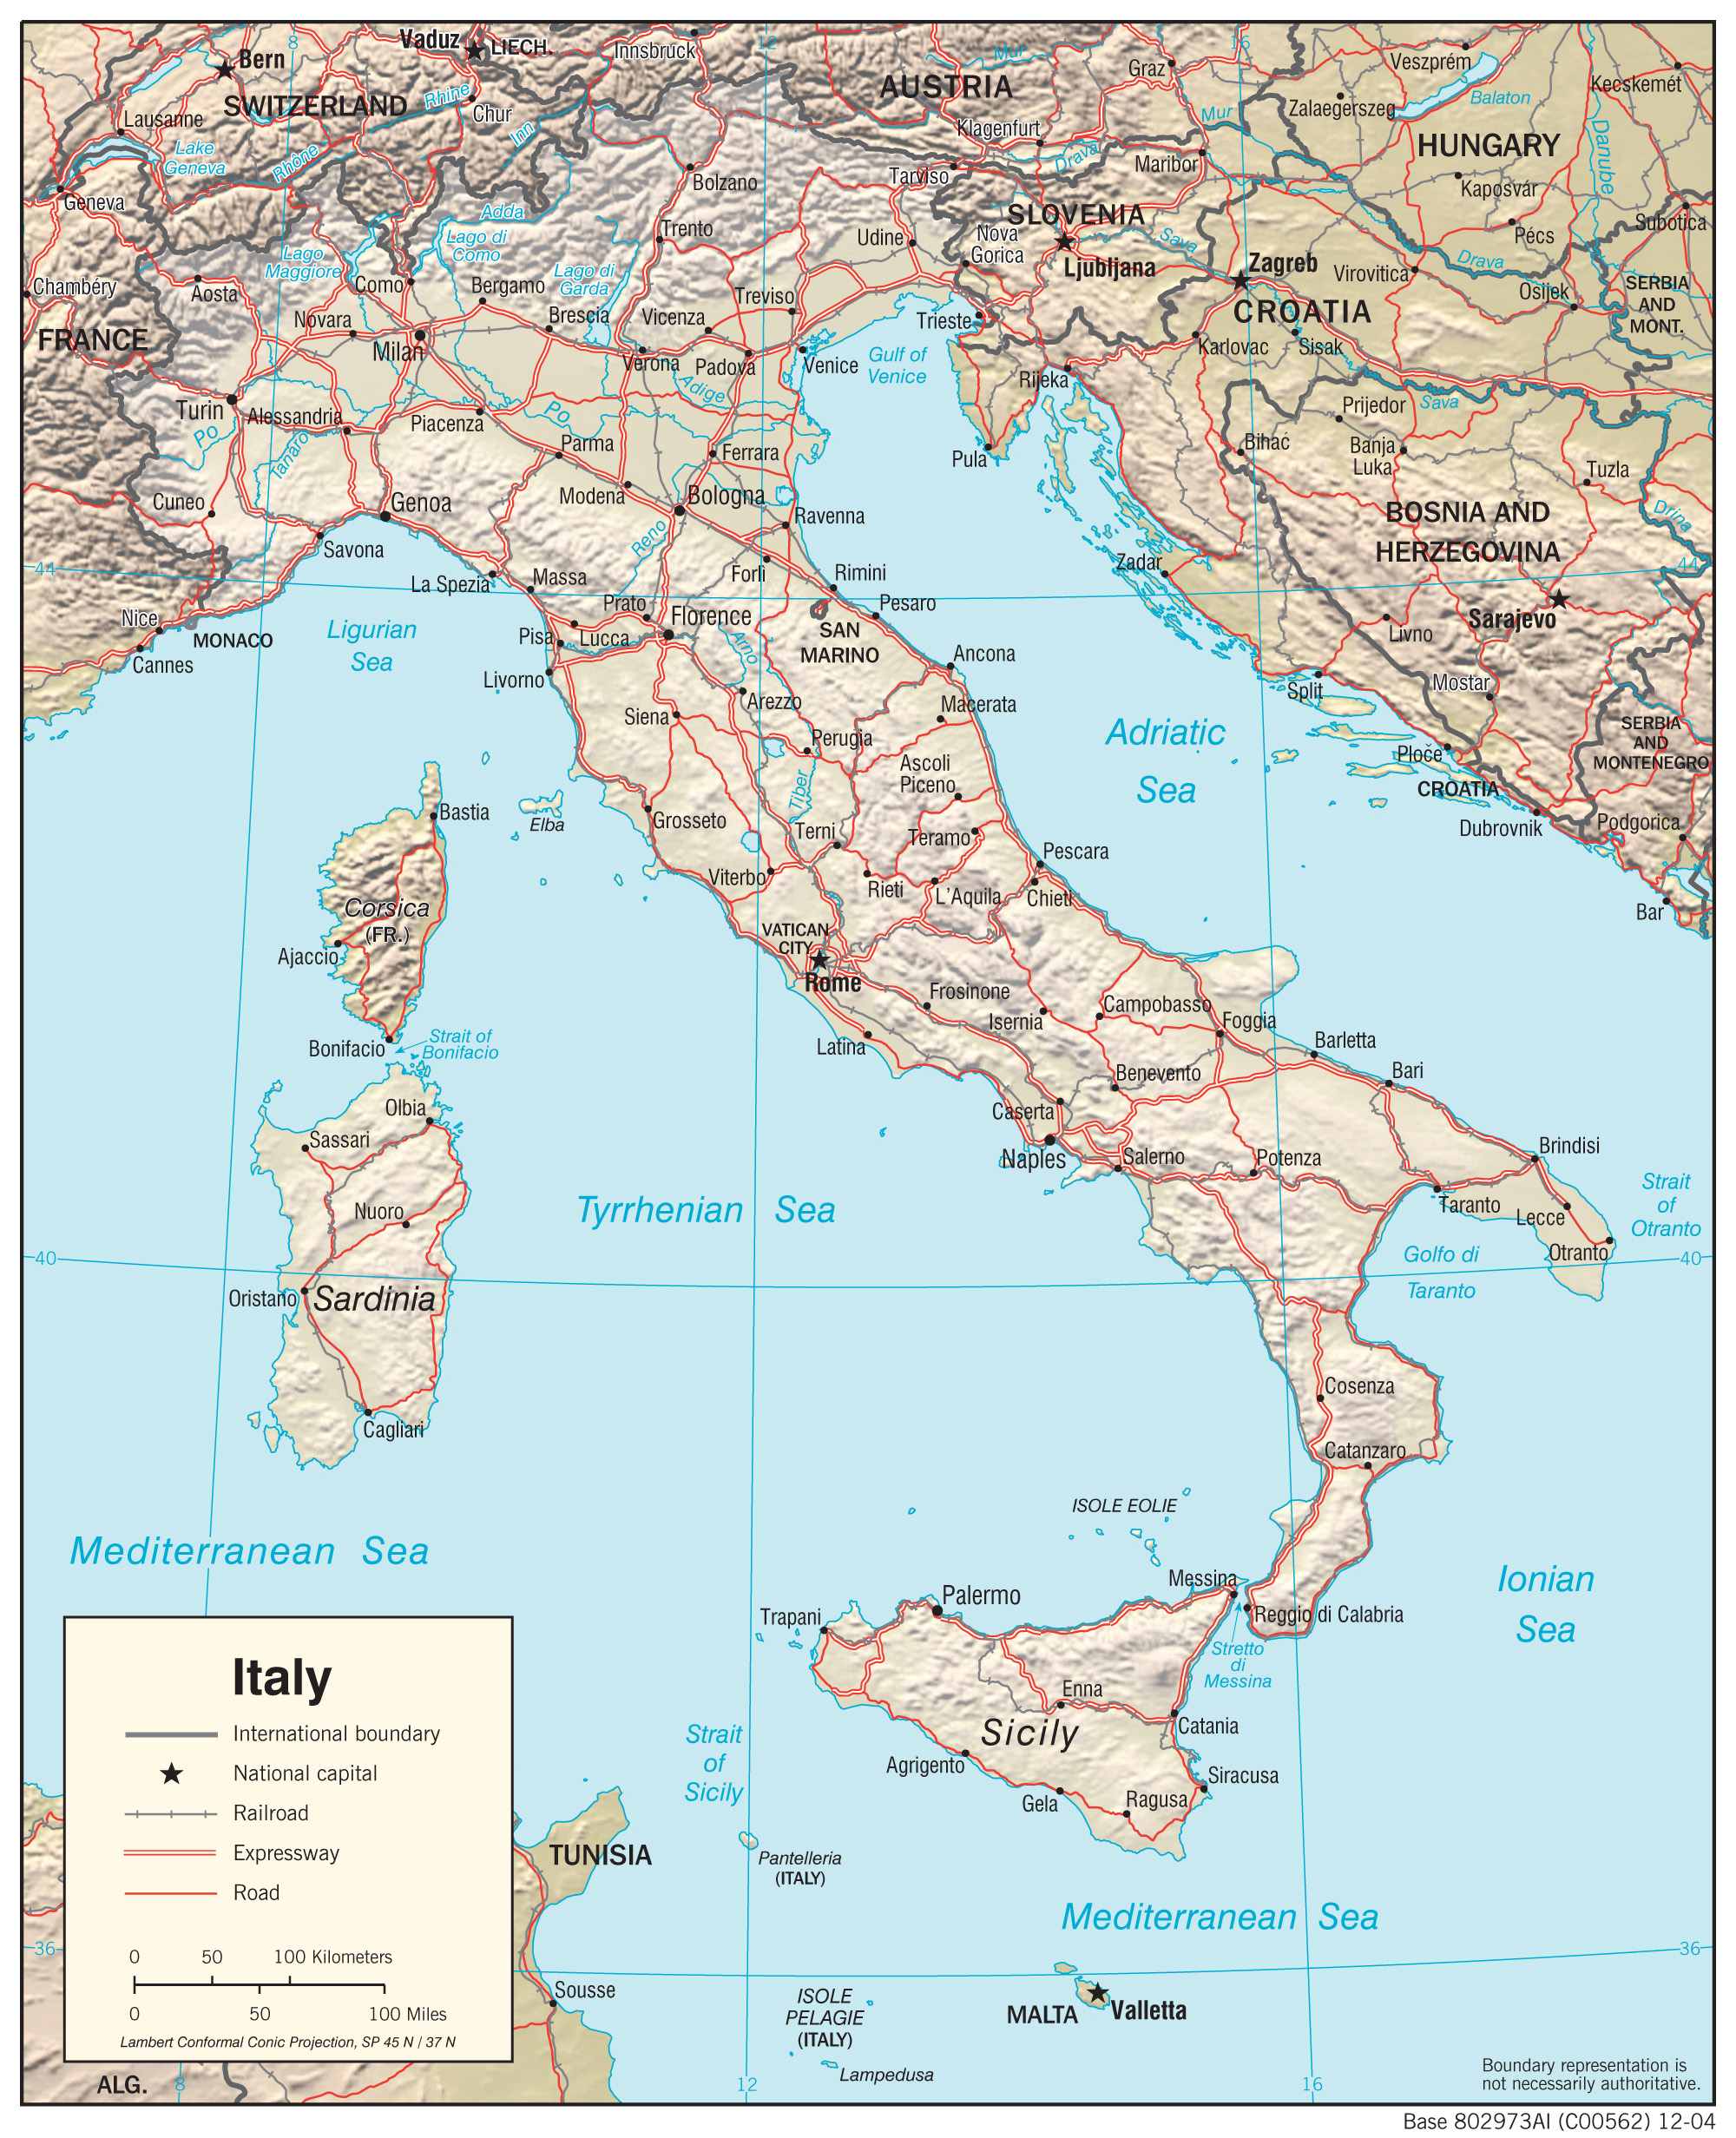 maps-of-italy-detailed-map-of-italy-in-english-tourist-map-of-italy